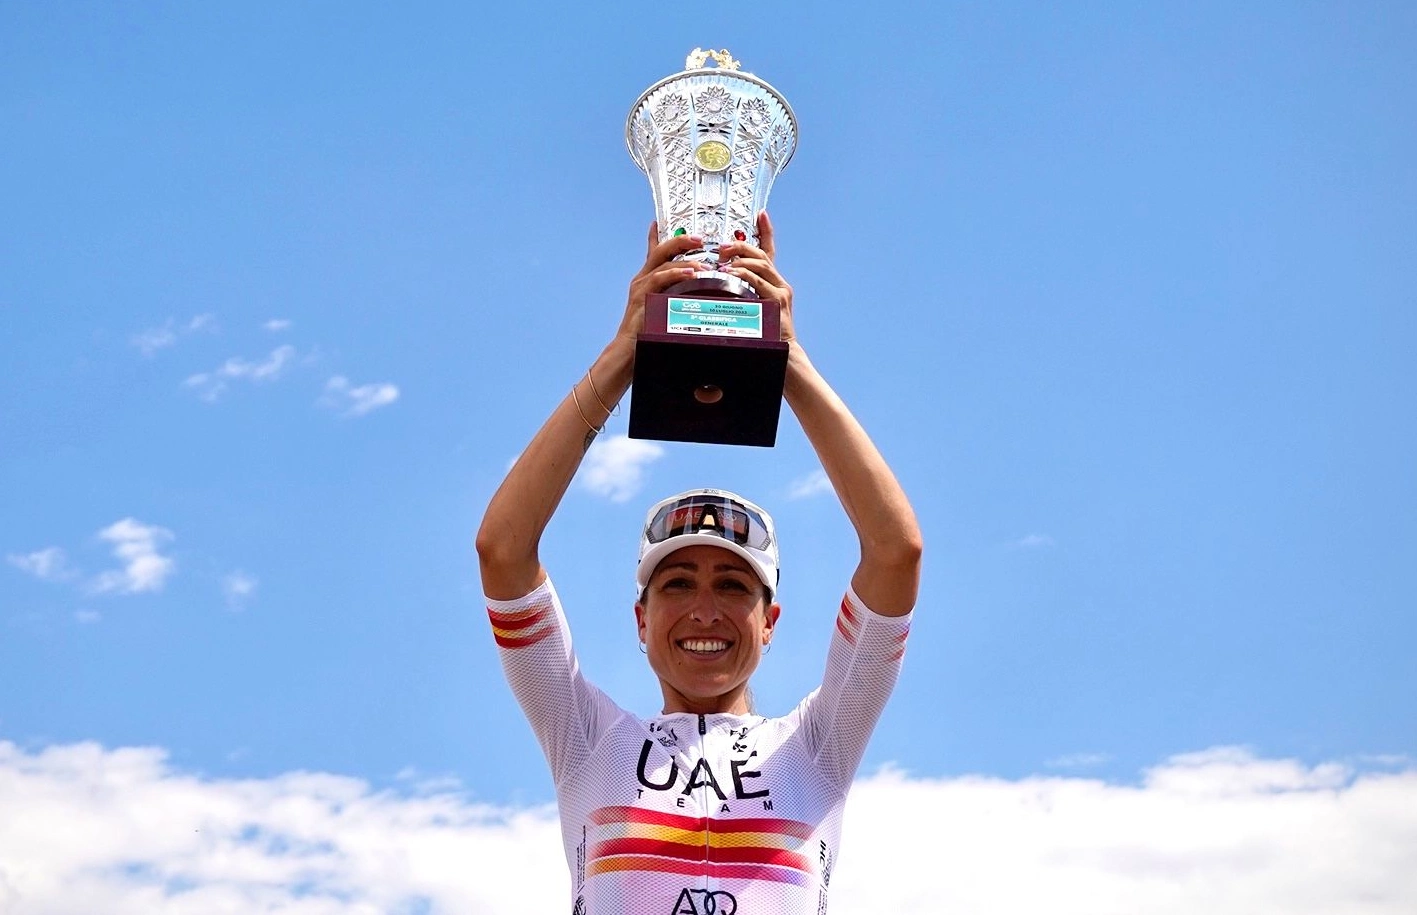 Mavi Garcia on the third step of the final podium of the Giro Donne. Sofia Bertizzolo fifth in the final stage in Padua